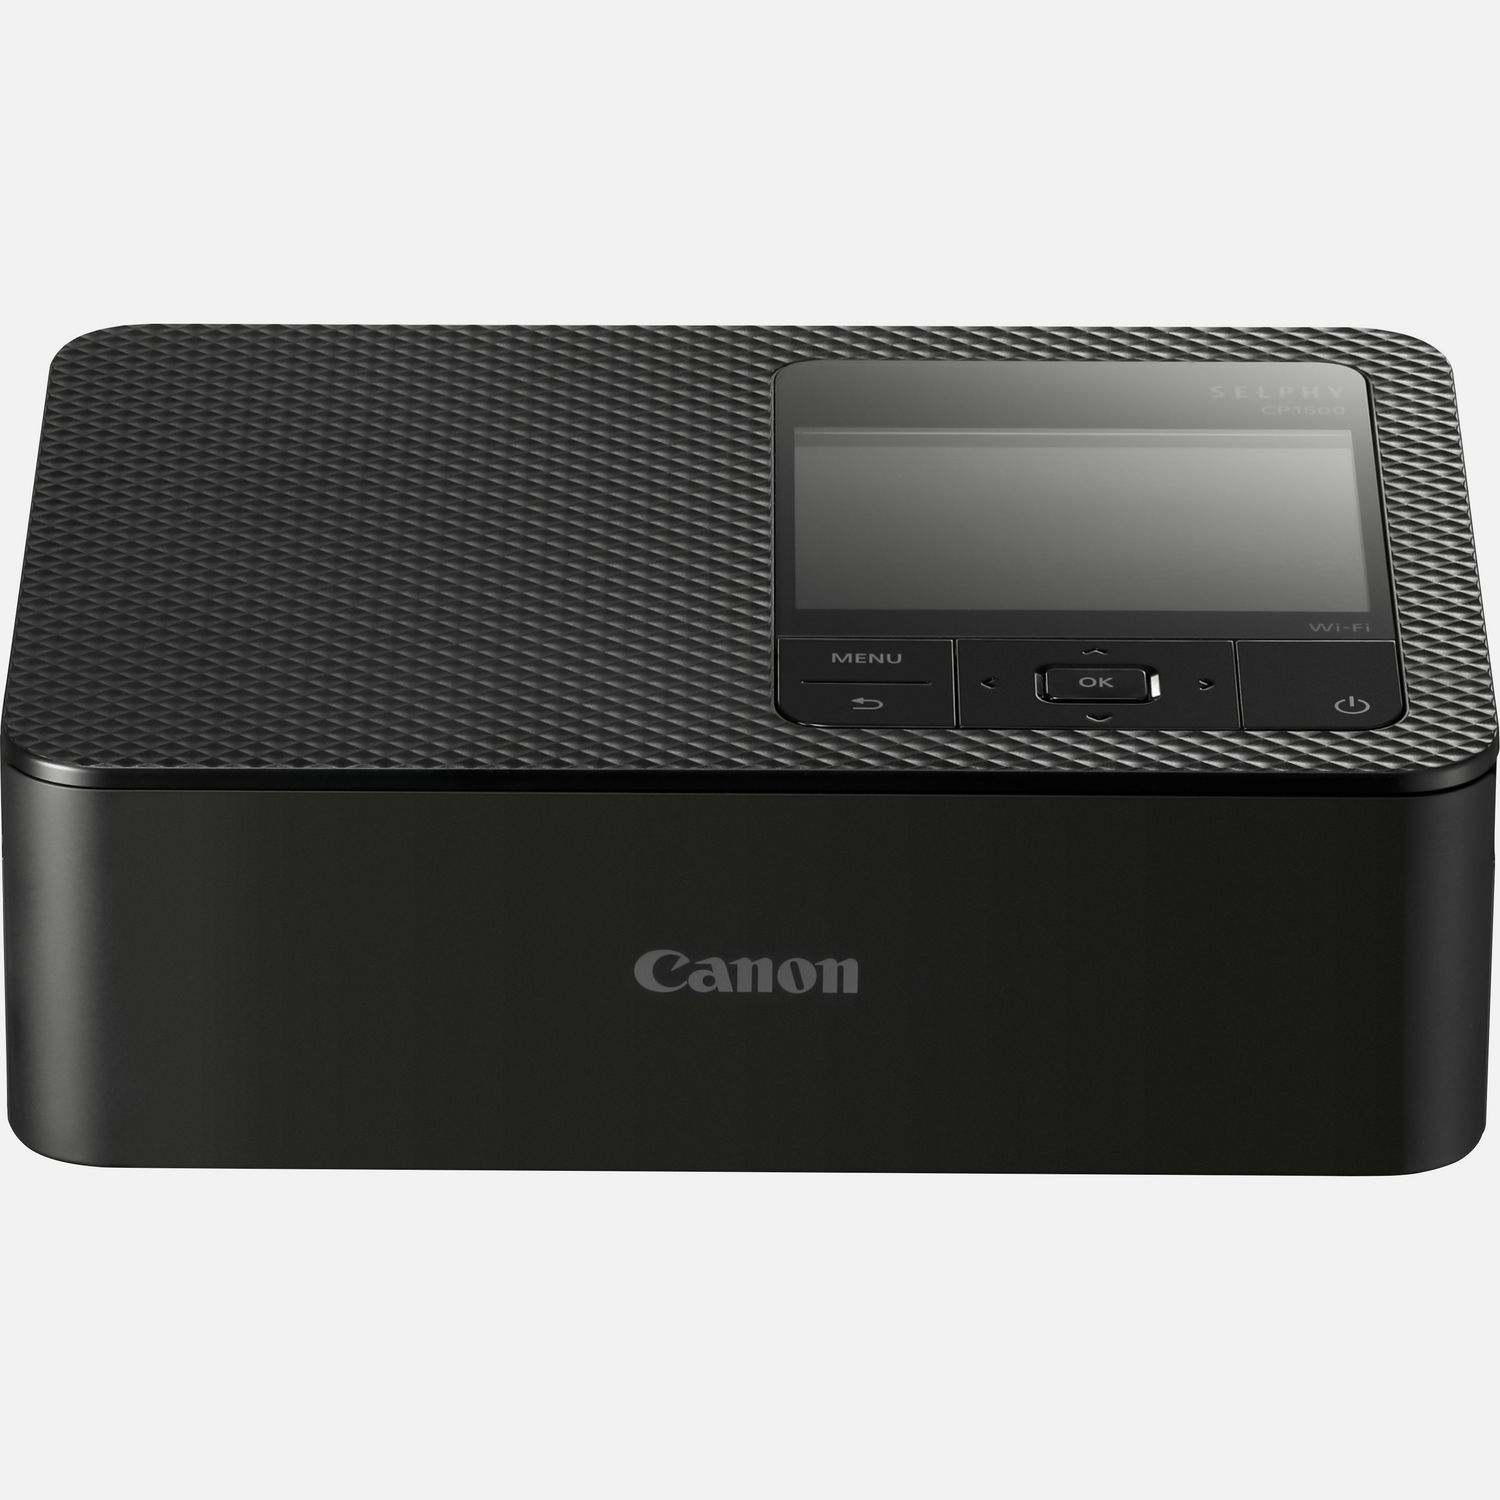 Canon SELPHY CP1500 Compact Photo Printer with KP-108 Ink/Paper